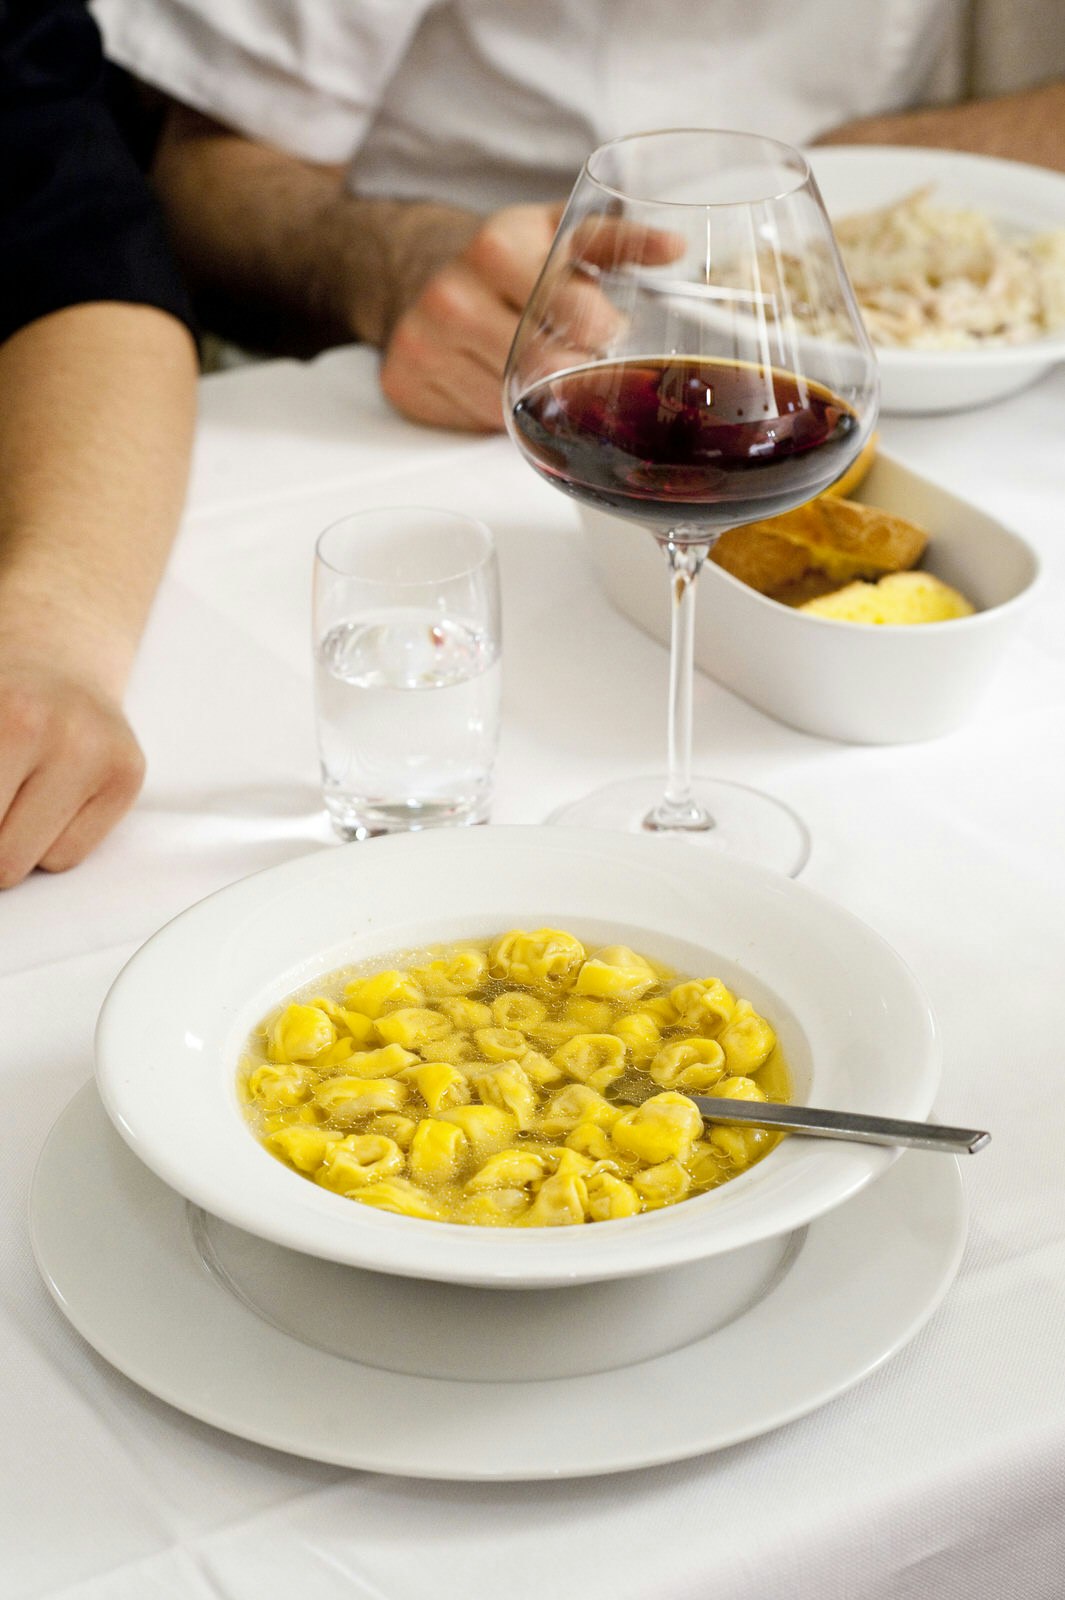 A close up of Tortellini in Brodo served in a white dish on a white tablecloth. The pasta and broth dish is next to a large glass of red wine.